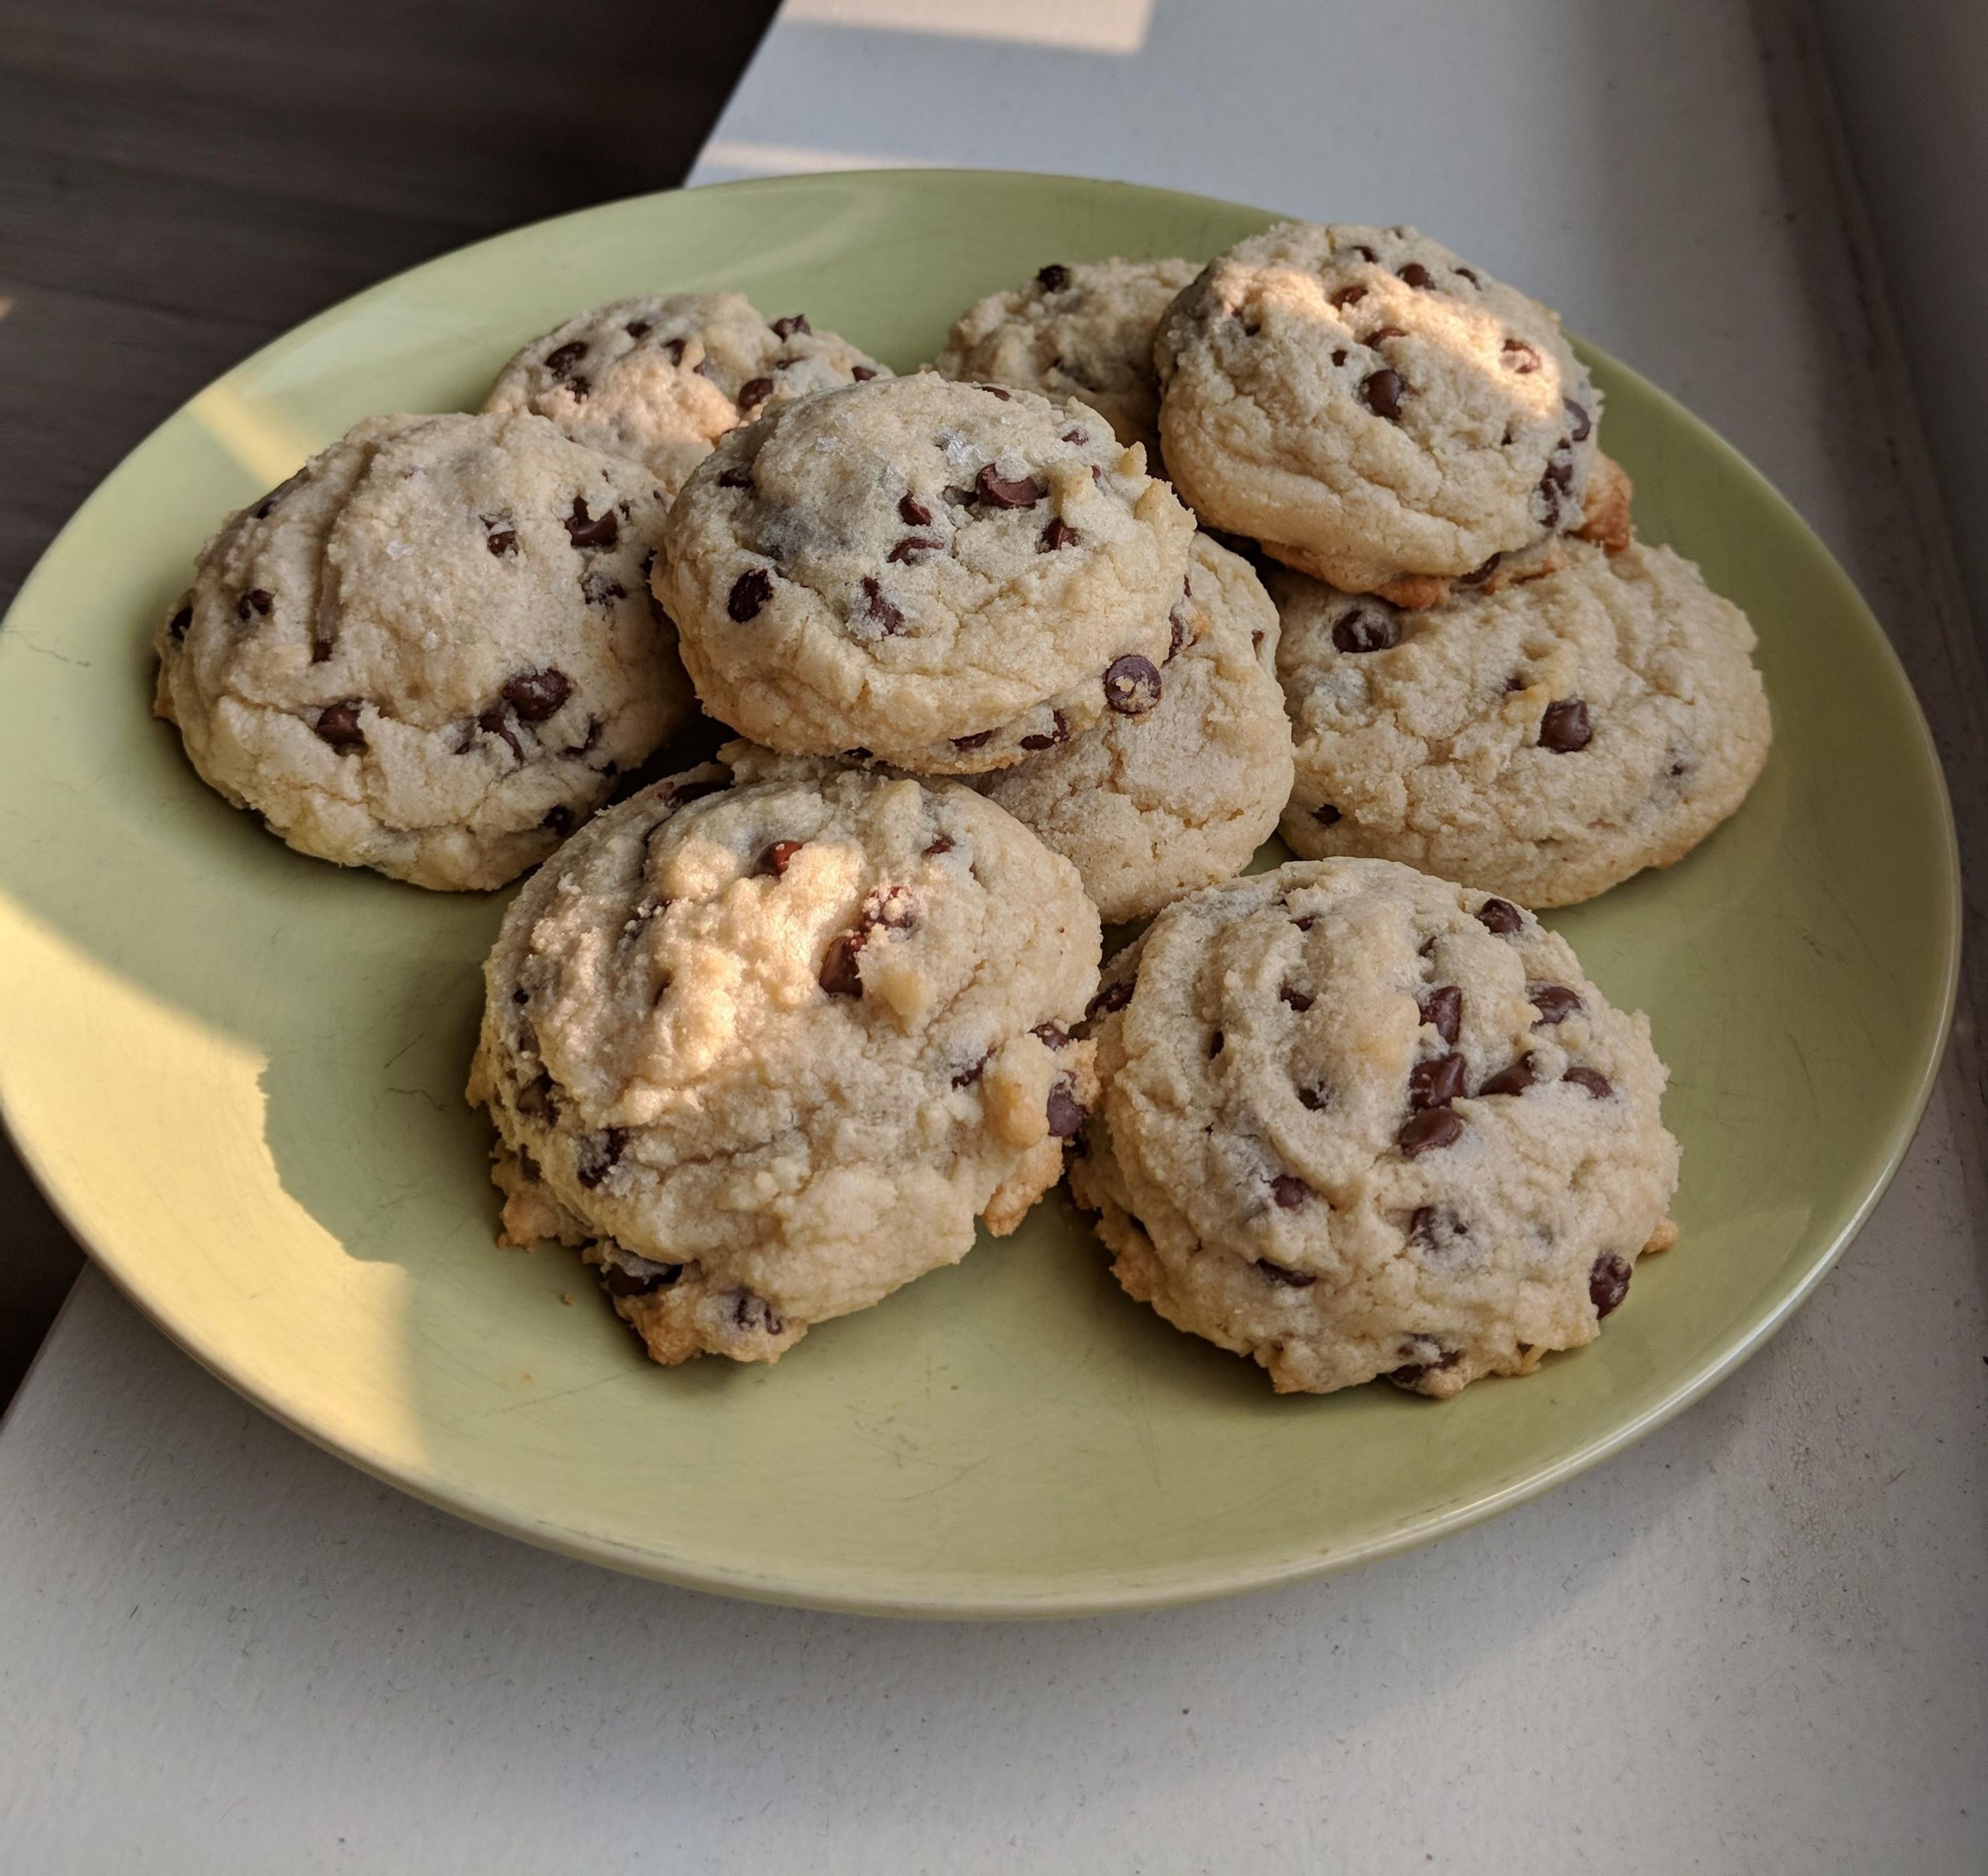 Chocolate Chip Cookies with Baking Powder Beautiful Cake Flour Chocolate Chip Cookies Baking